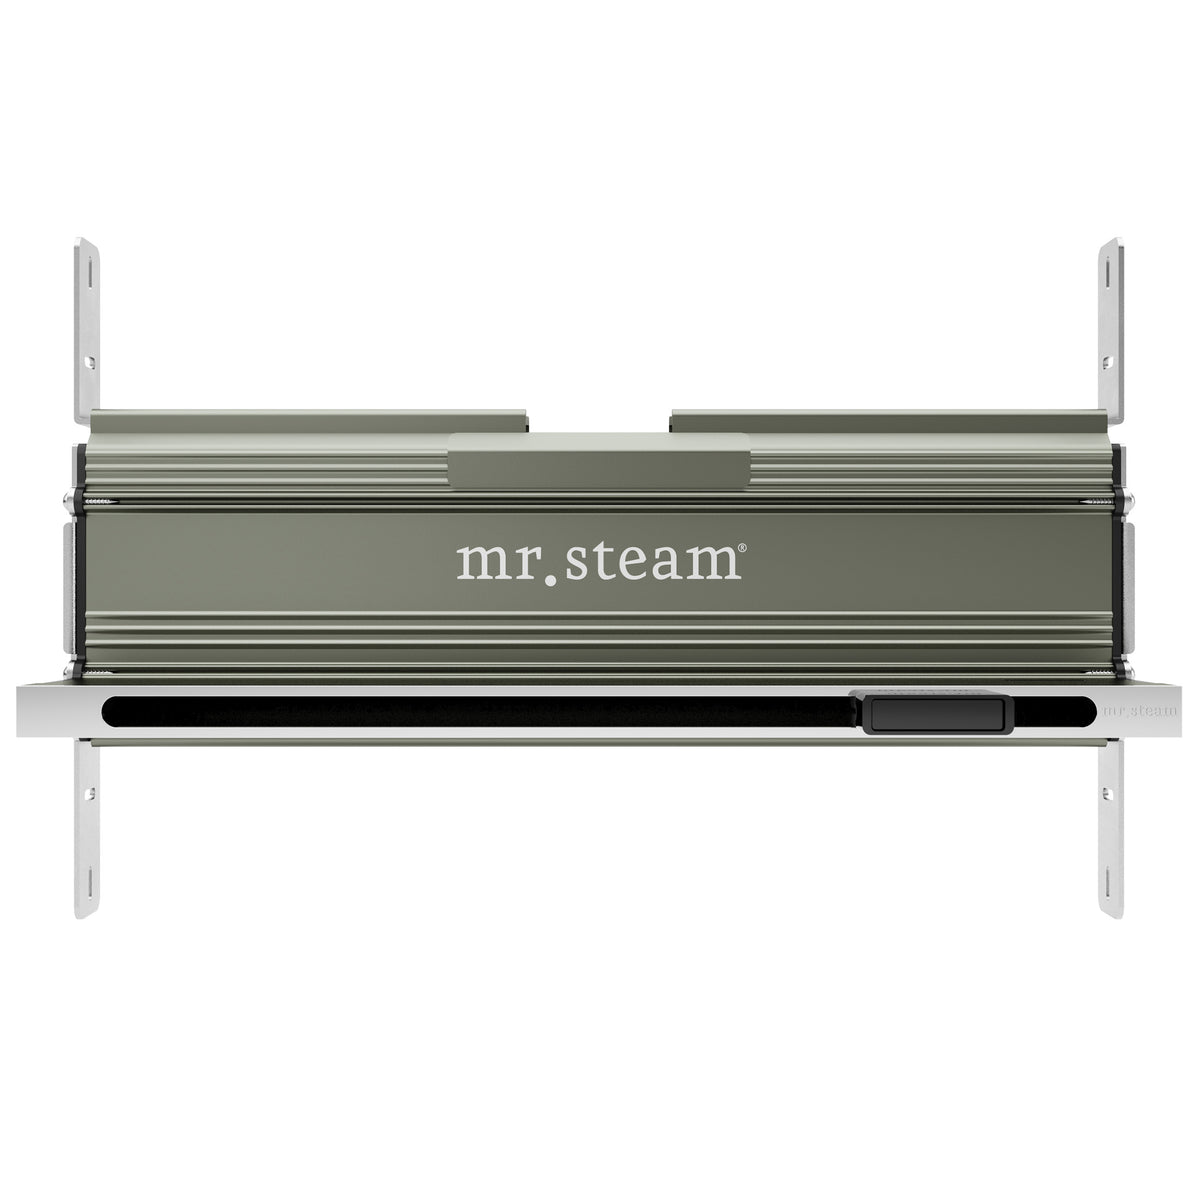 Mr. Steam XButler Max Linear Steam Shower Control Package with iSteamX Control and Linear SteamHead